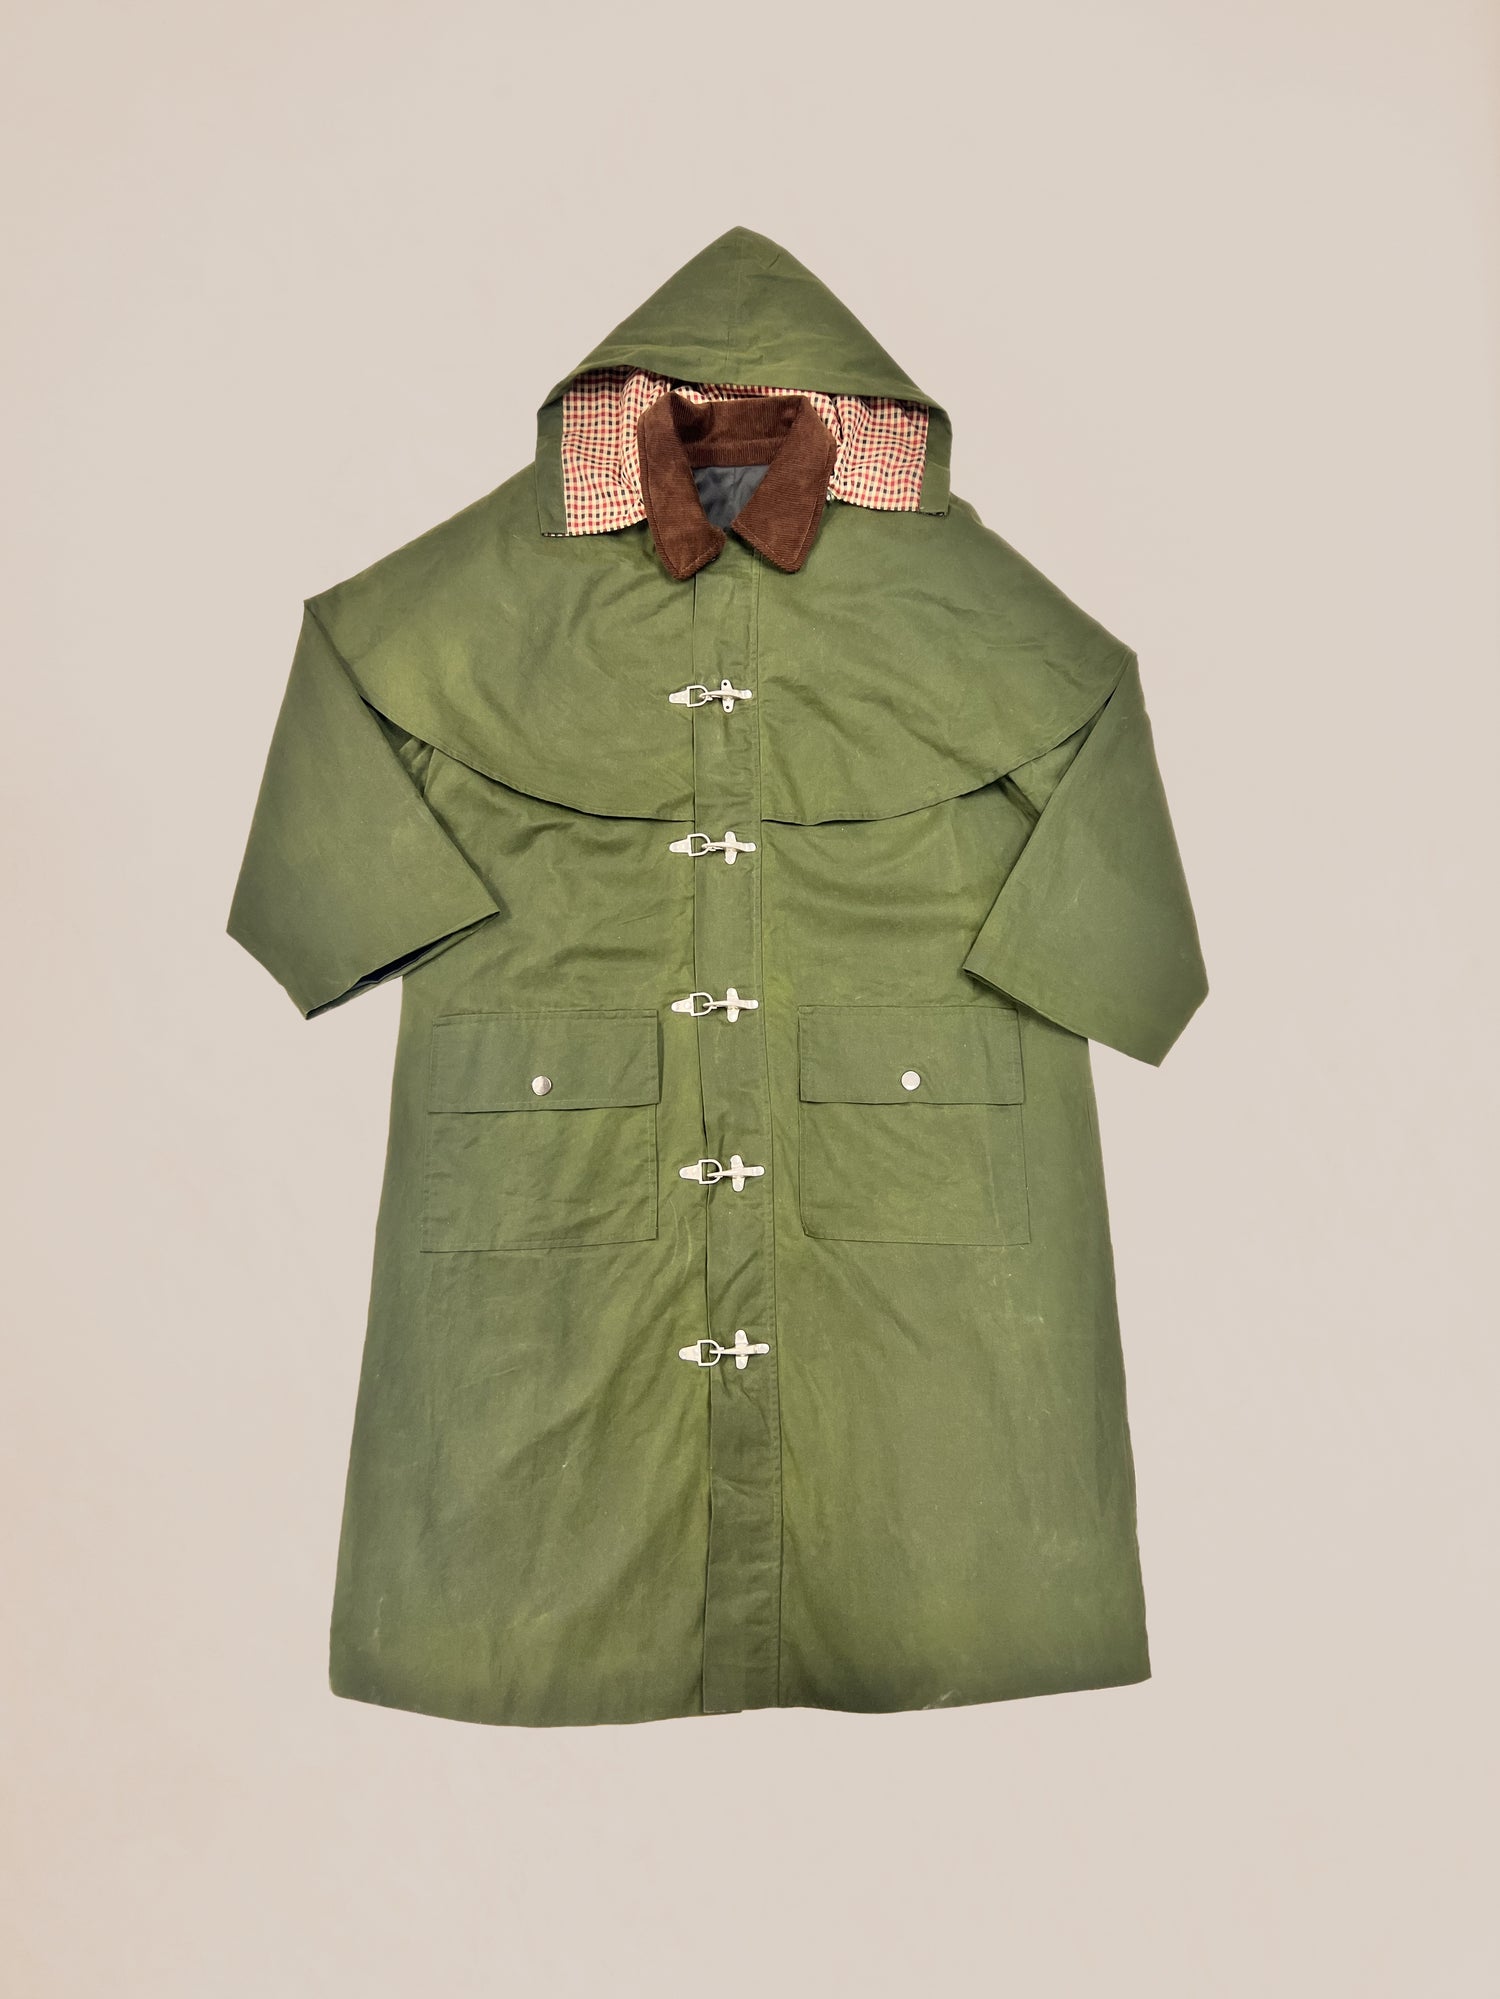 Olive green polyester coat with toggle buttons and a checkered lining on the collar displayed against a neutral background. 
Product Name: Olive Buckle Coat (Sample 41)
Brand Name: Profound